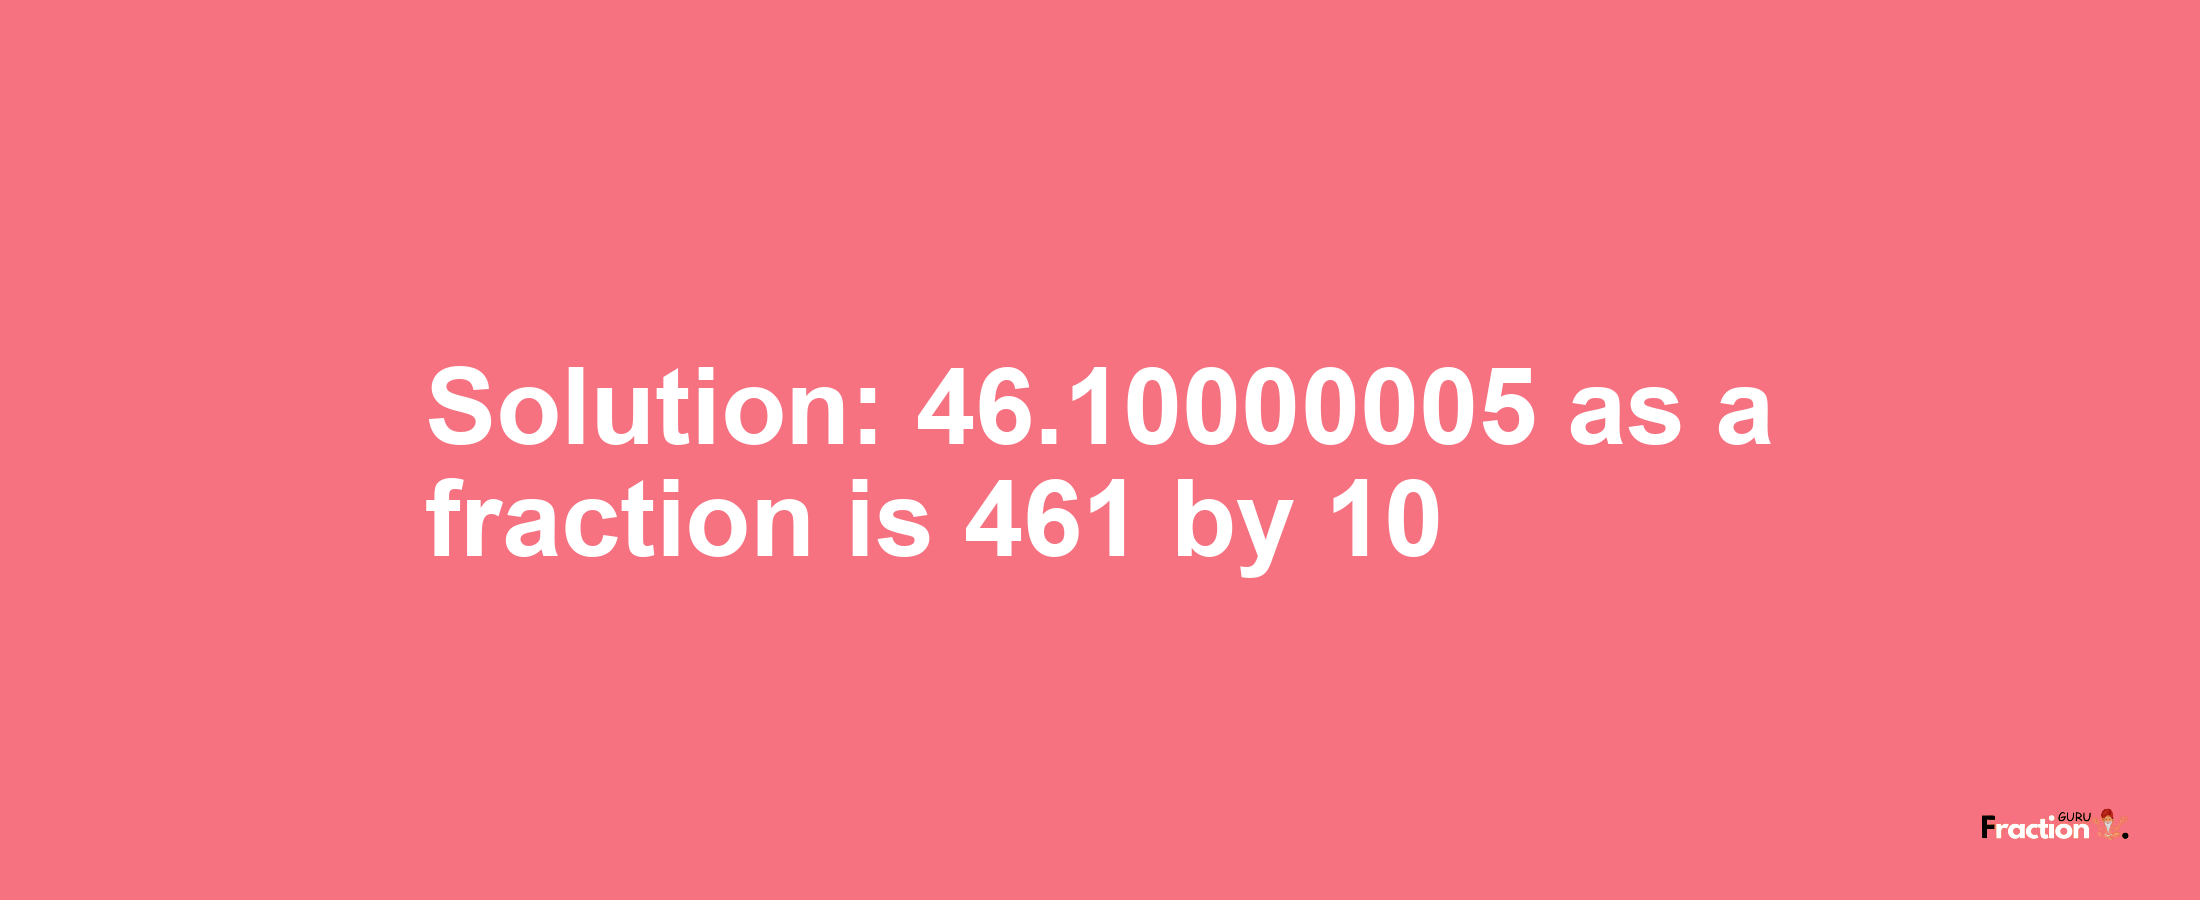 Solution:46.10000005 as a fraction is 461/10